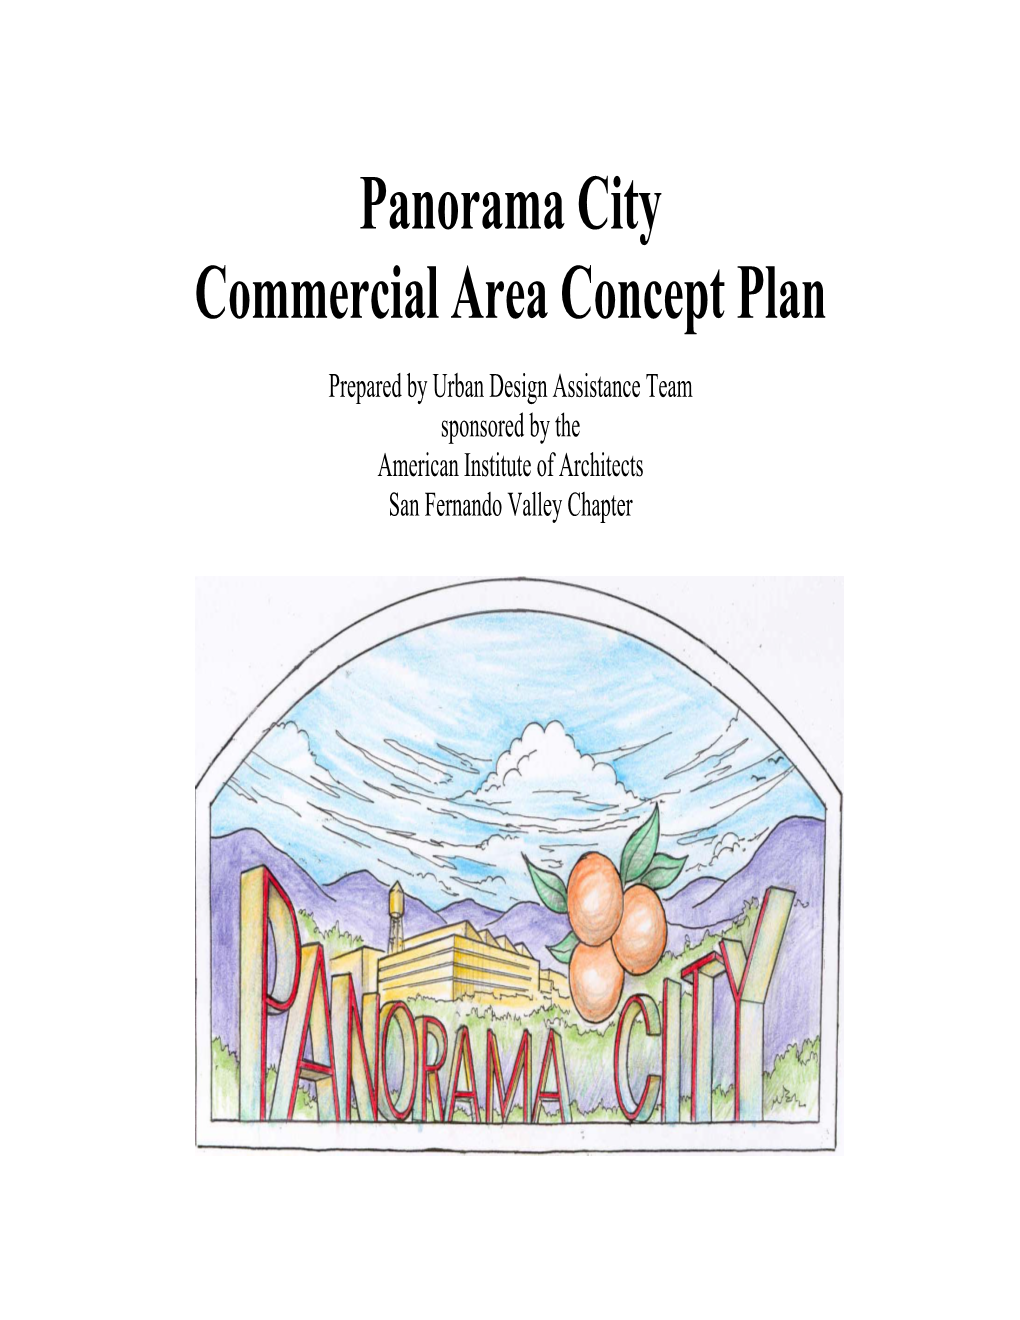 Panorama City Commercial Area Concept Plan